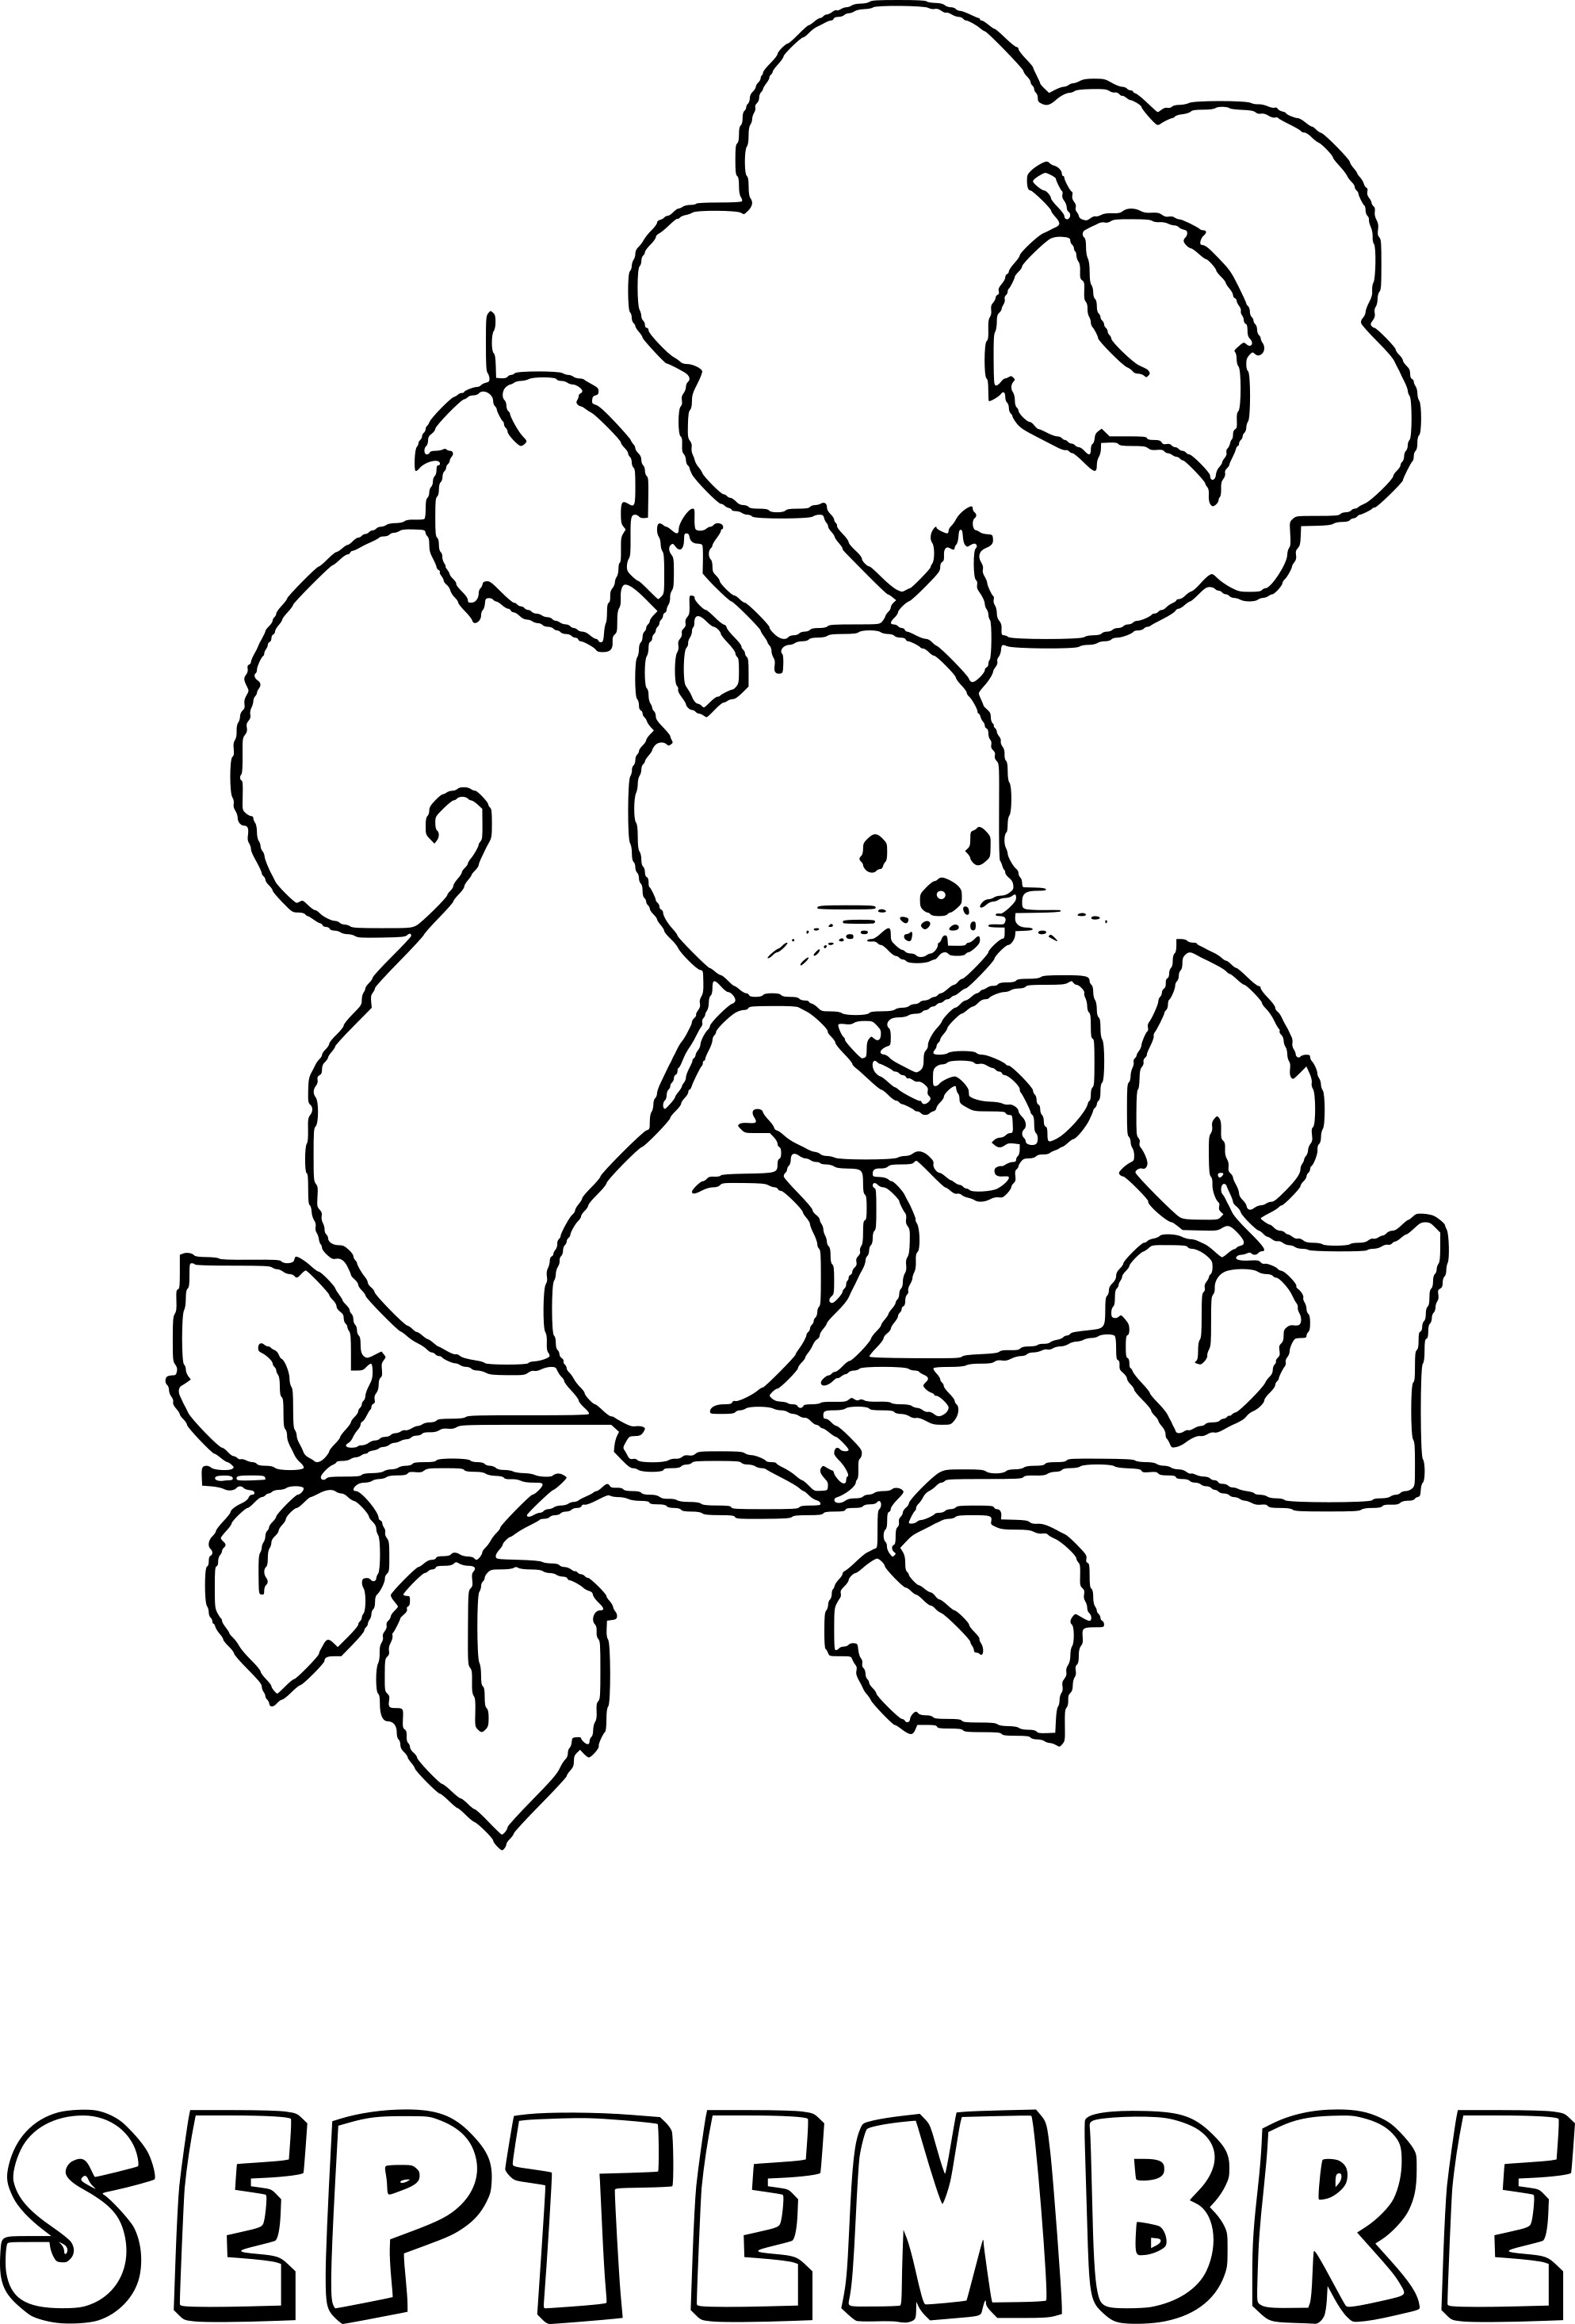 Month Of September coloring page